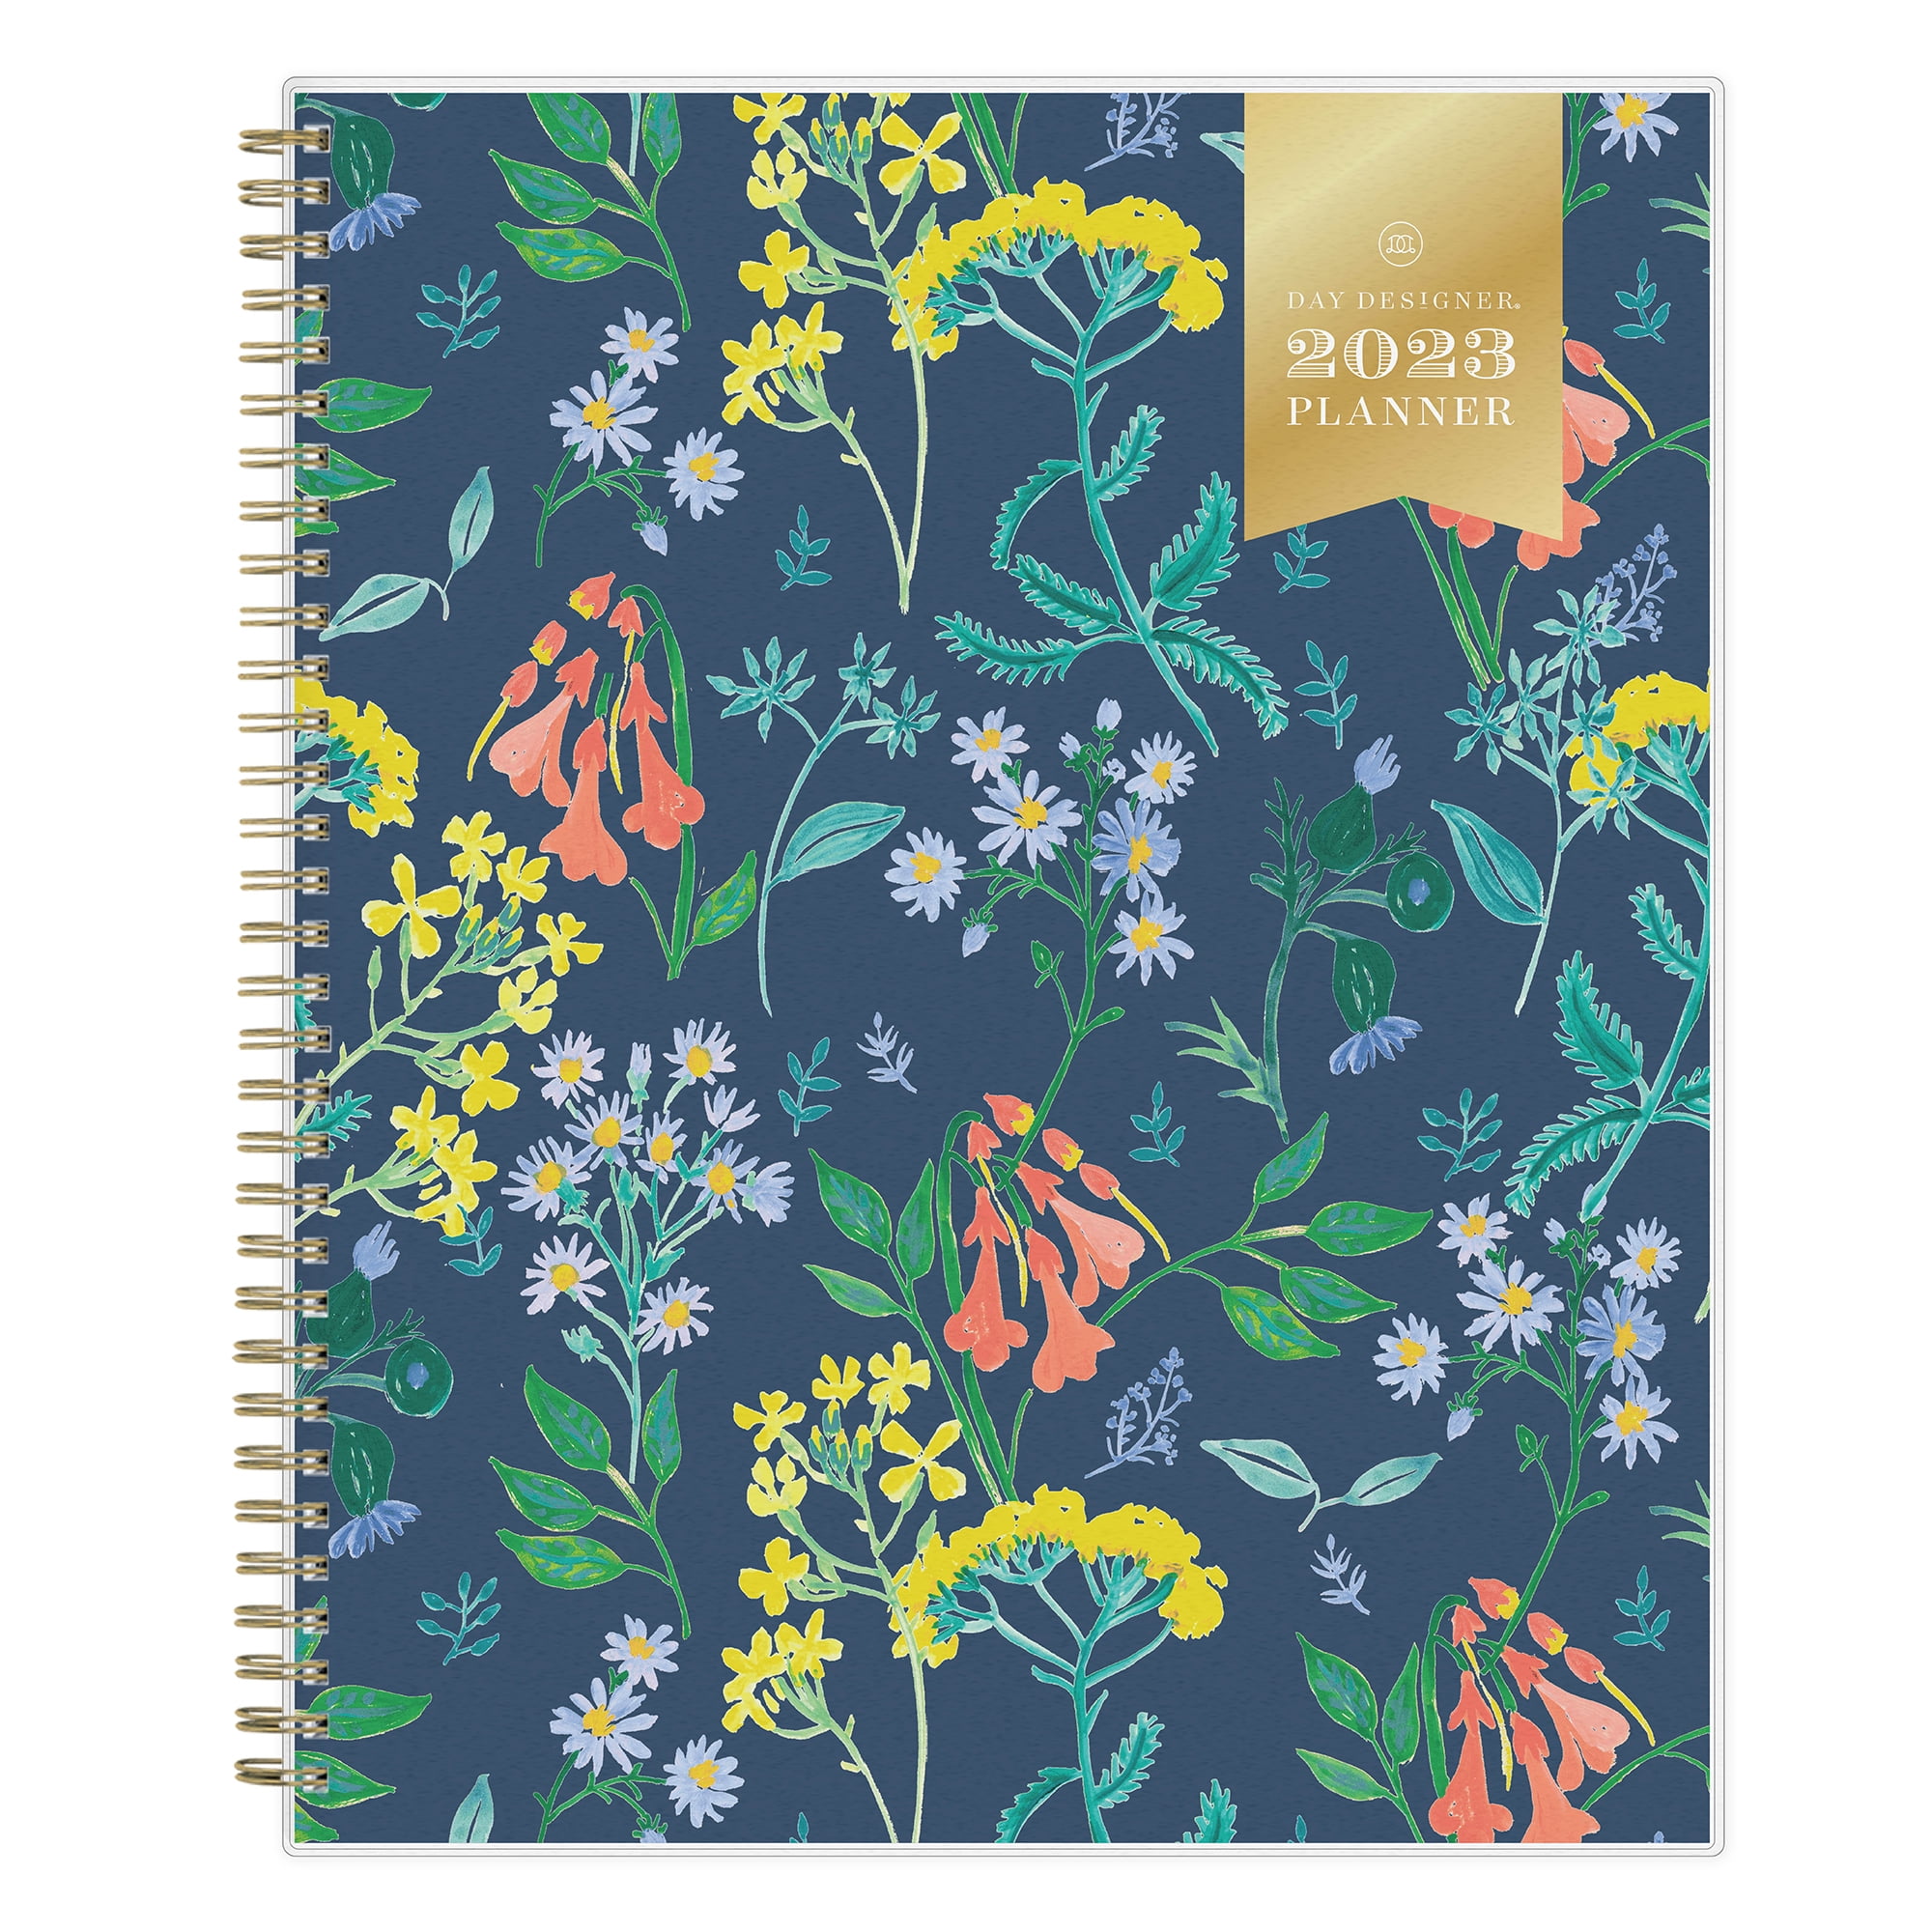 2023 Weekly & Monthly Planner, 8.5x11, Day Designer for Blue Sky, Meadow Blue